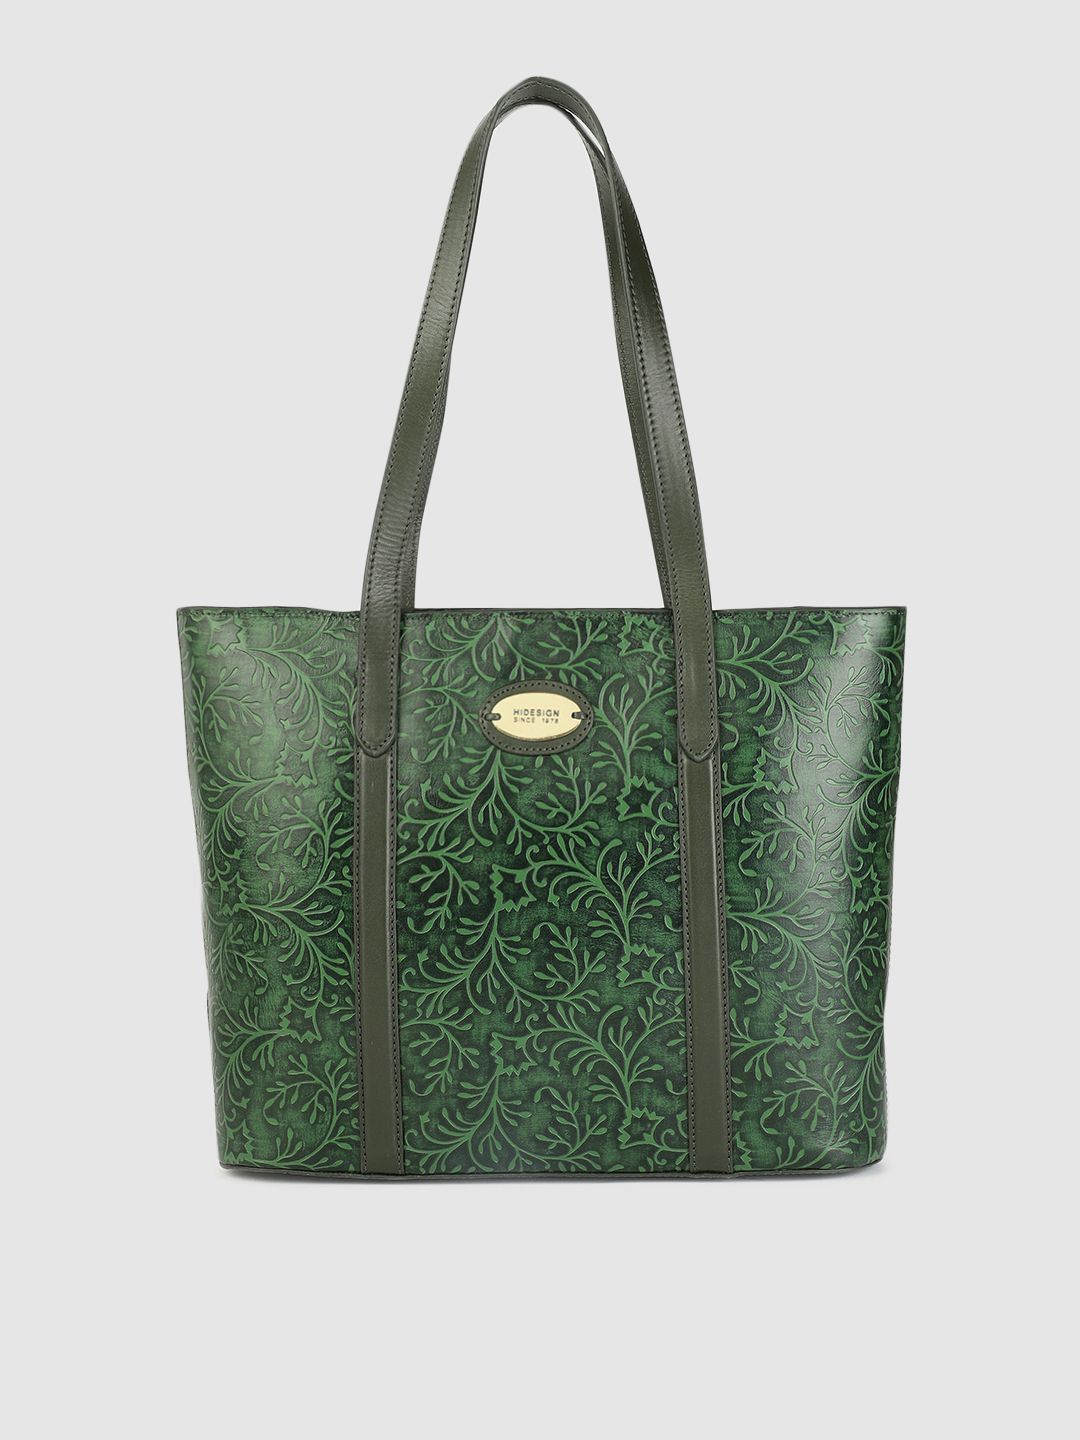 Hidesign Green Textured Leather Shoulder Bag Price in India